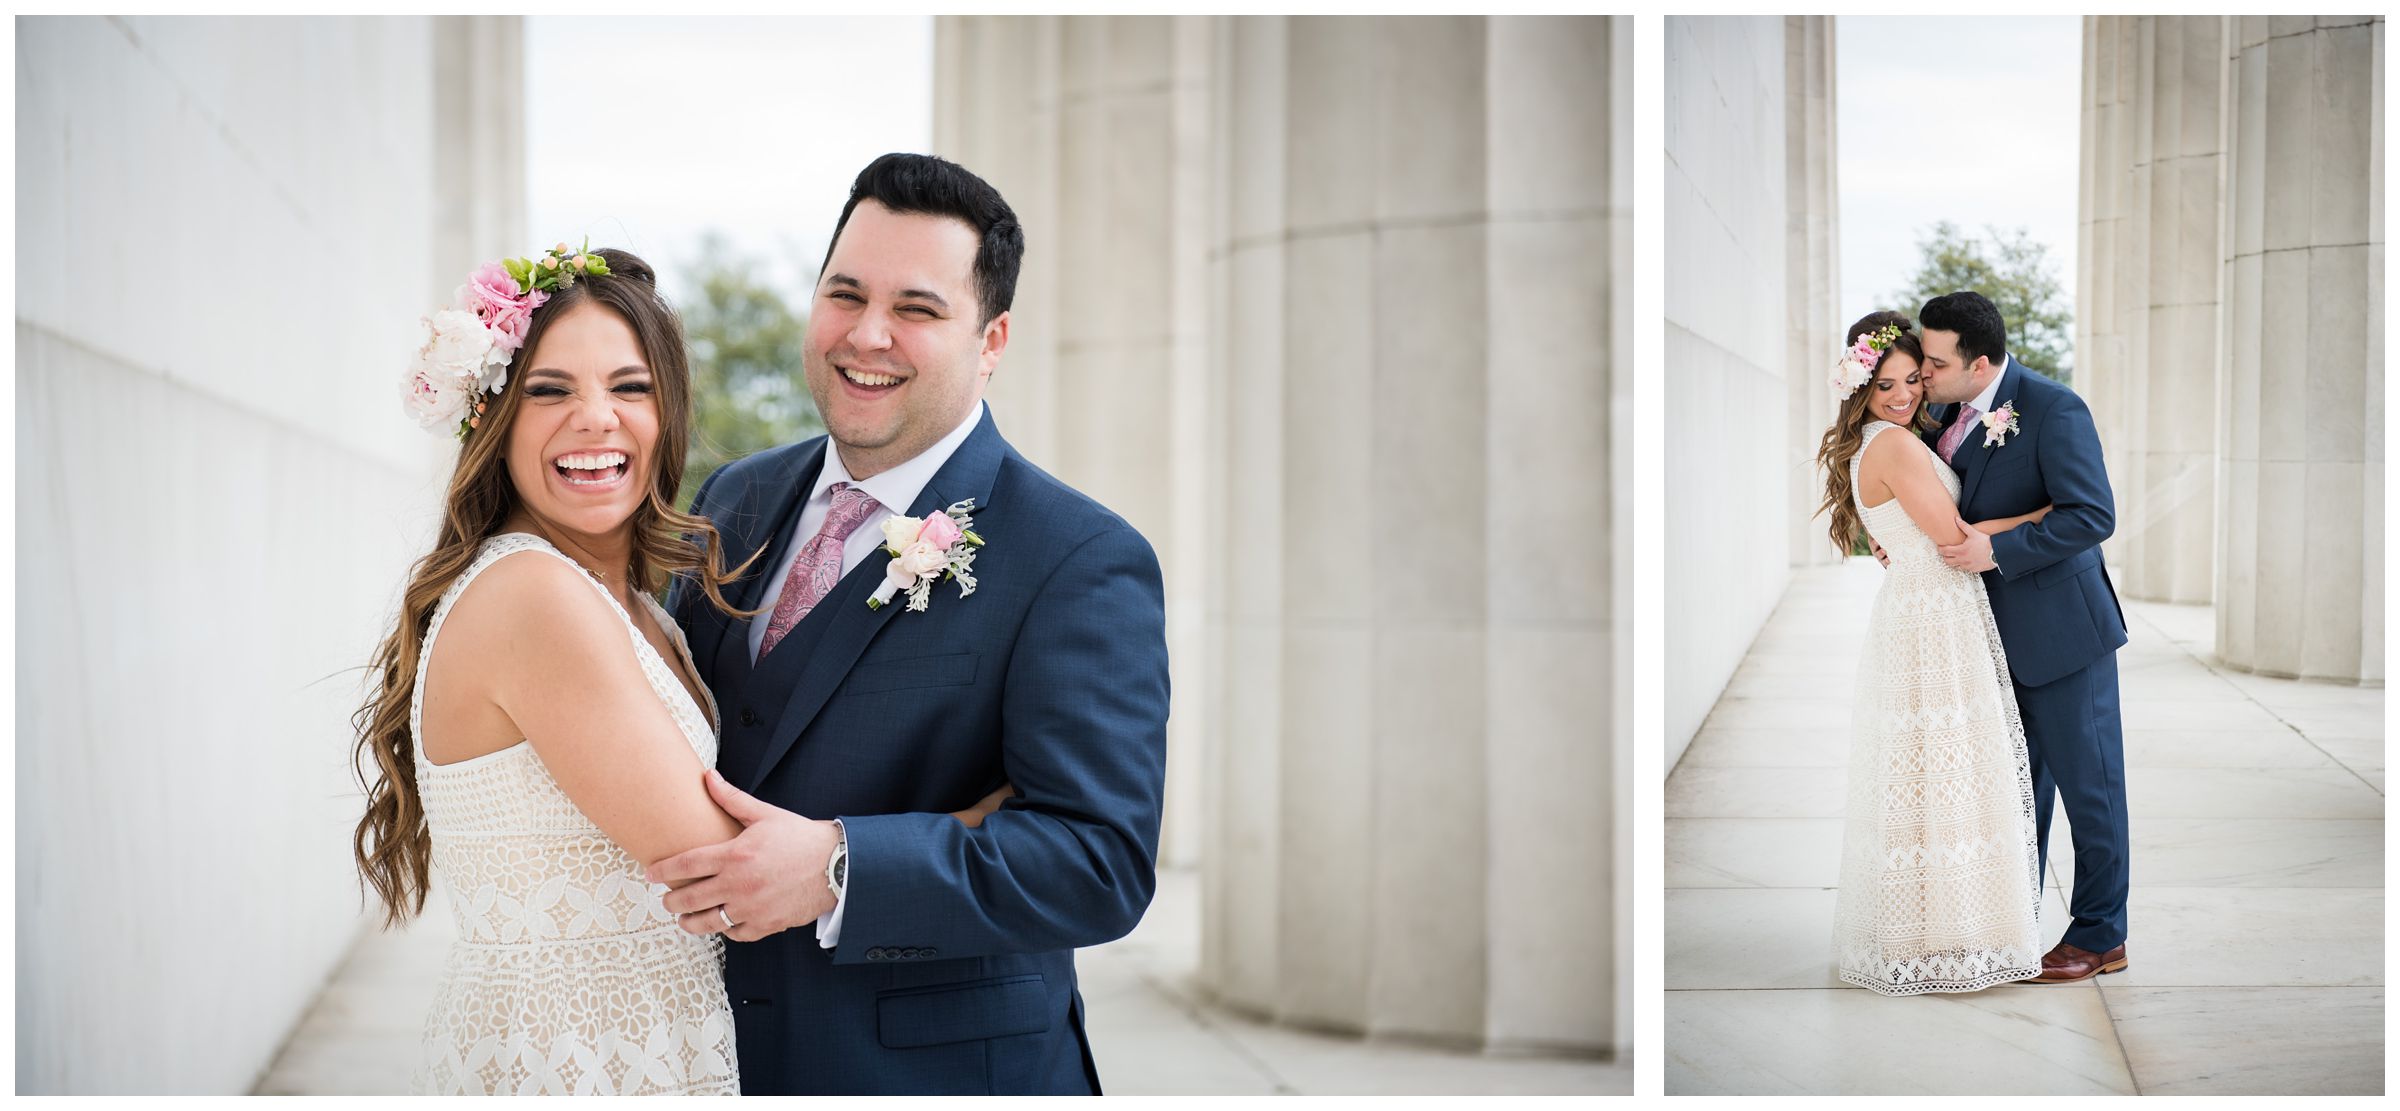 bride and groom portraits at Lincoln Memorial during DC monument wedding day on National Mall